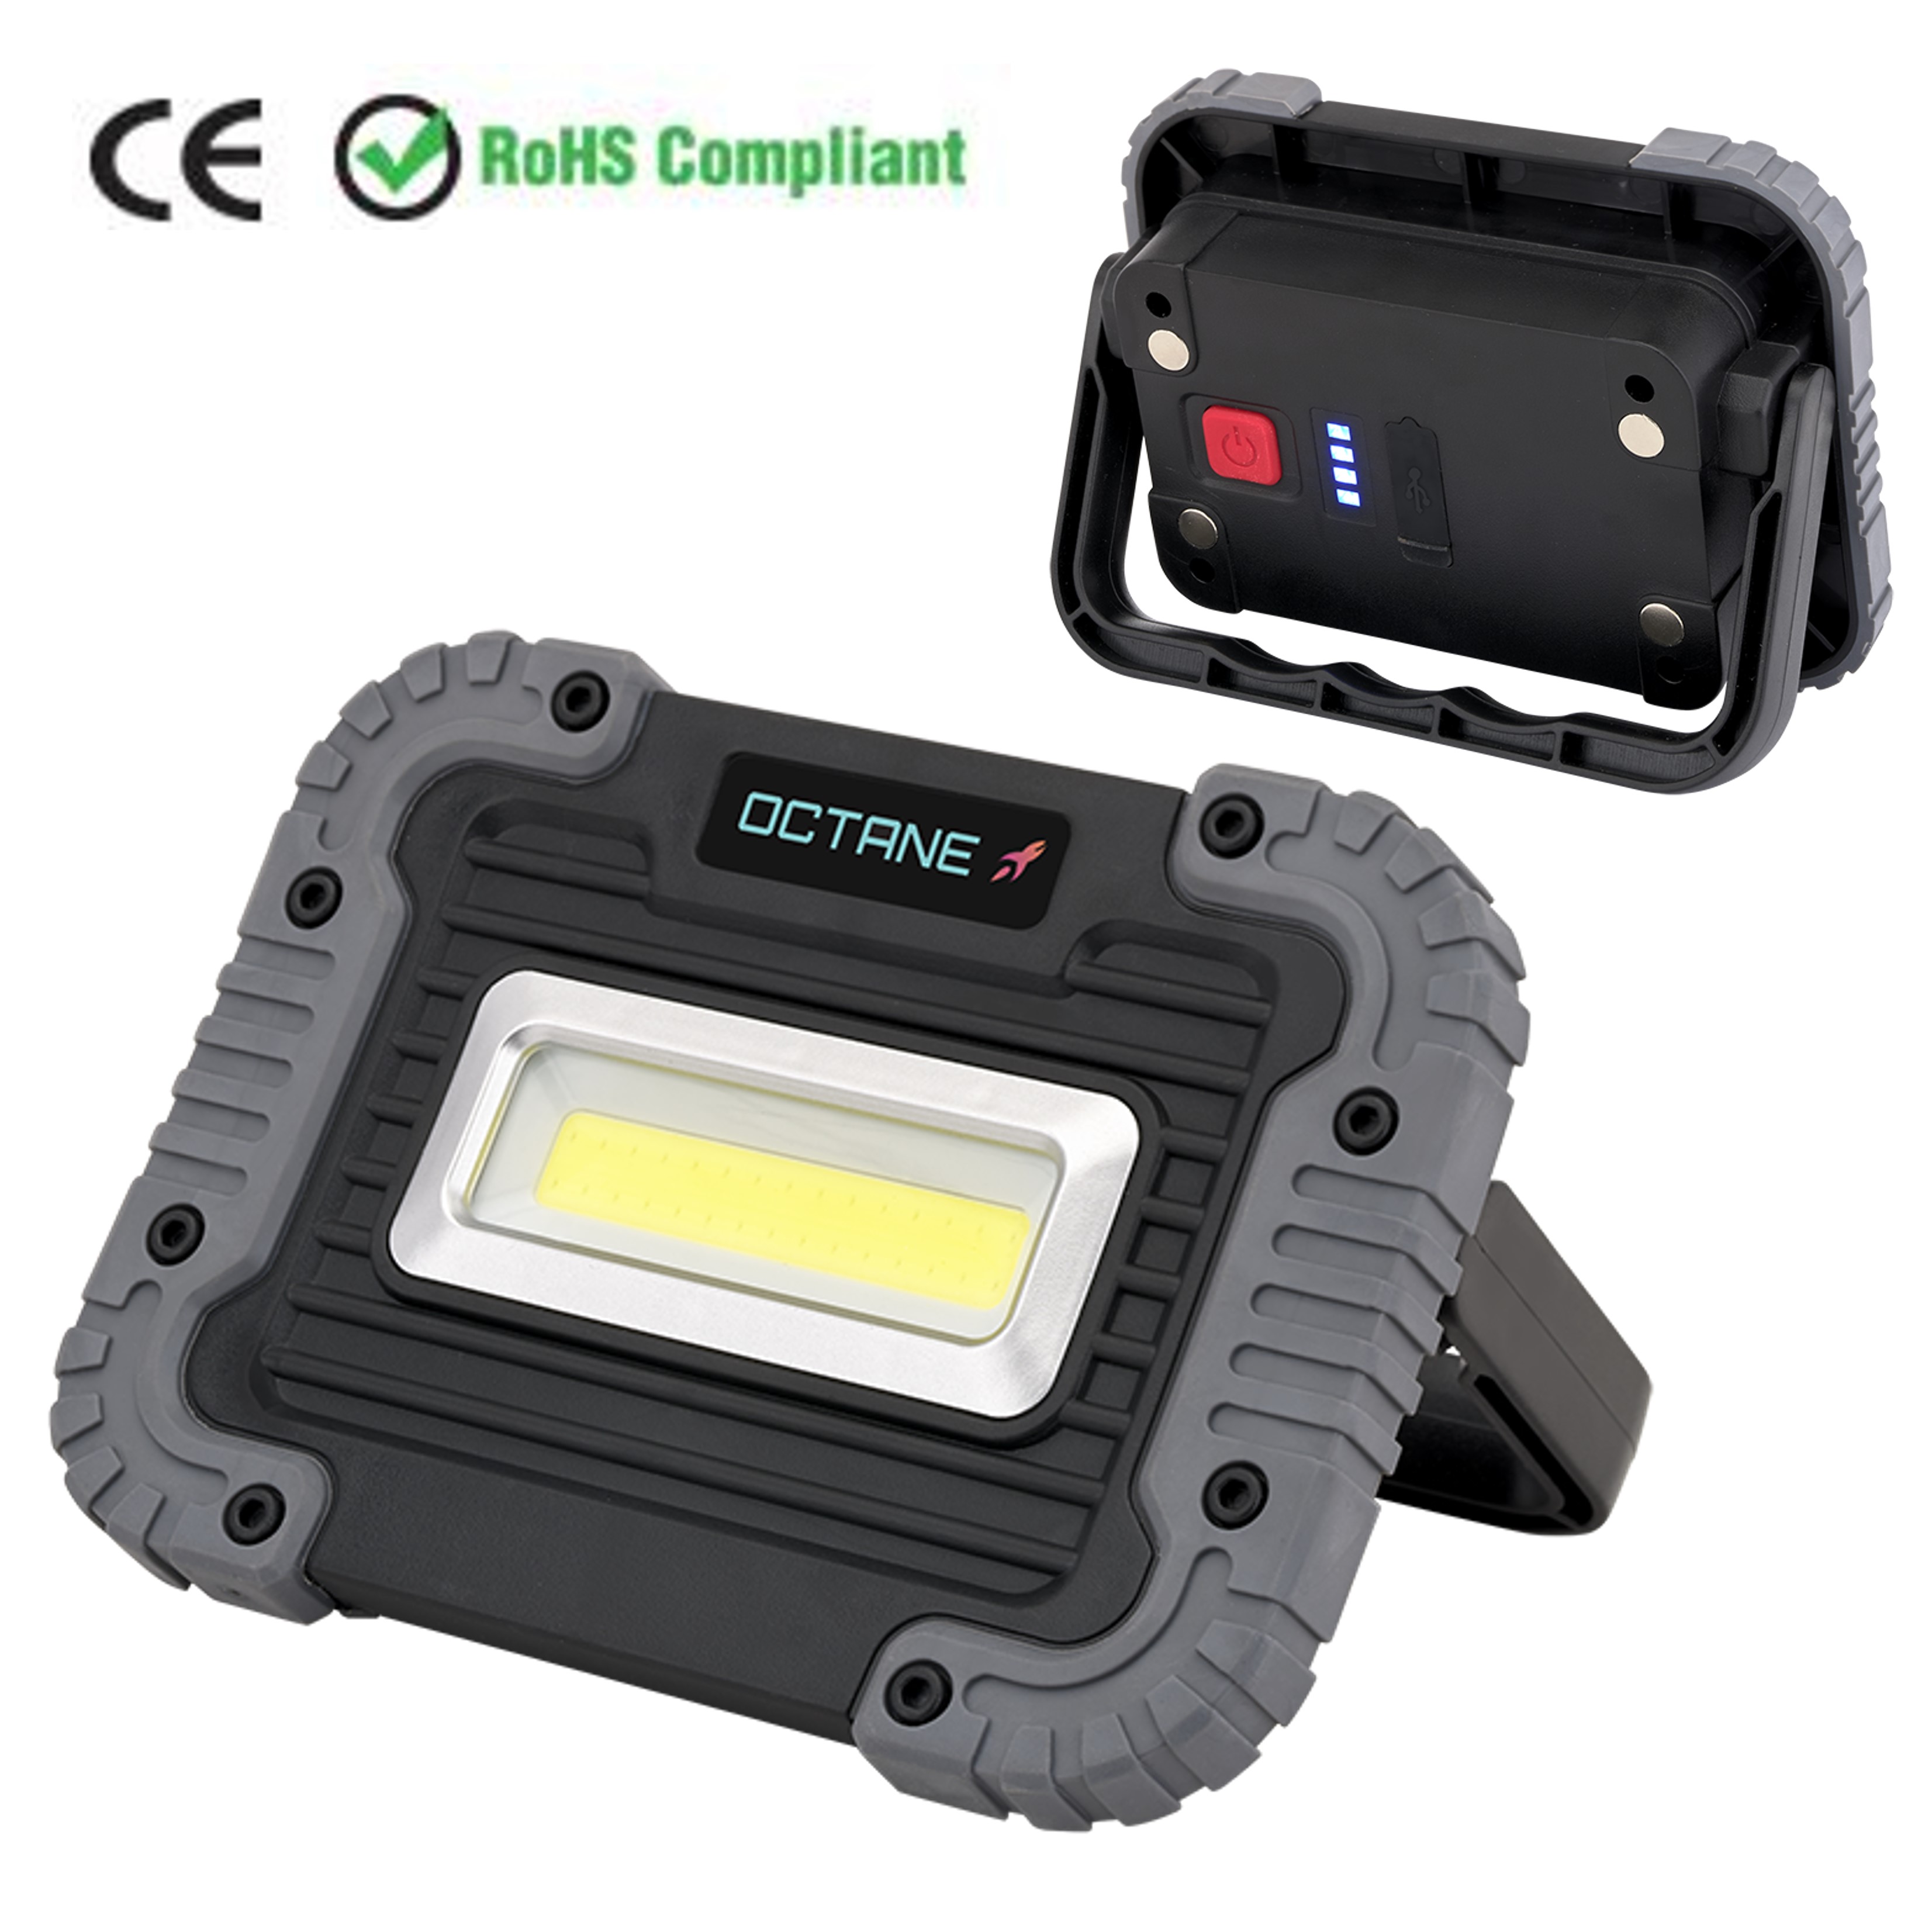 Rechargeable Worklight & Power Bank | RoHS Compliant